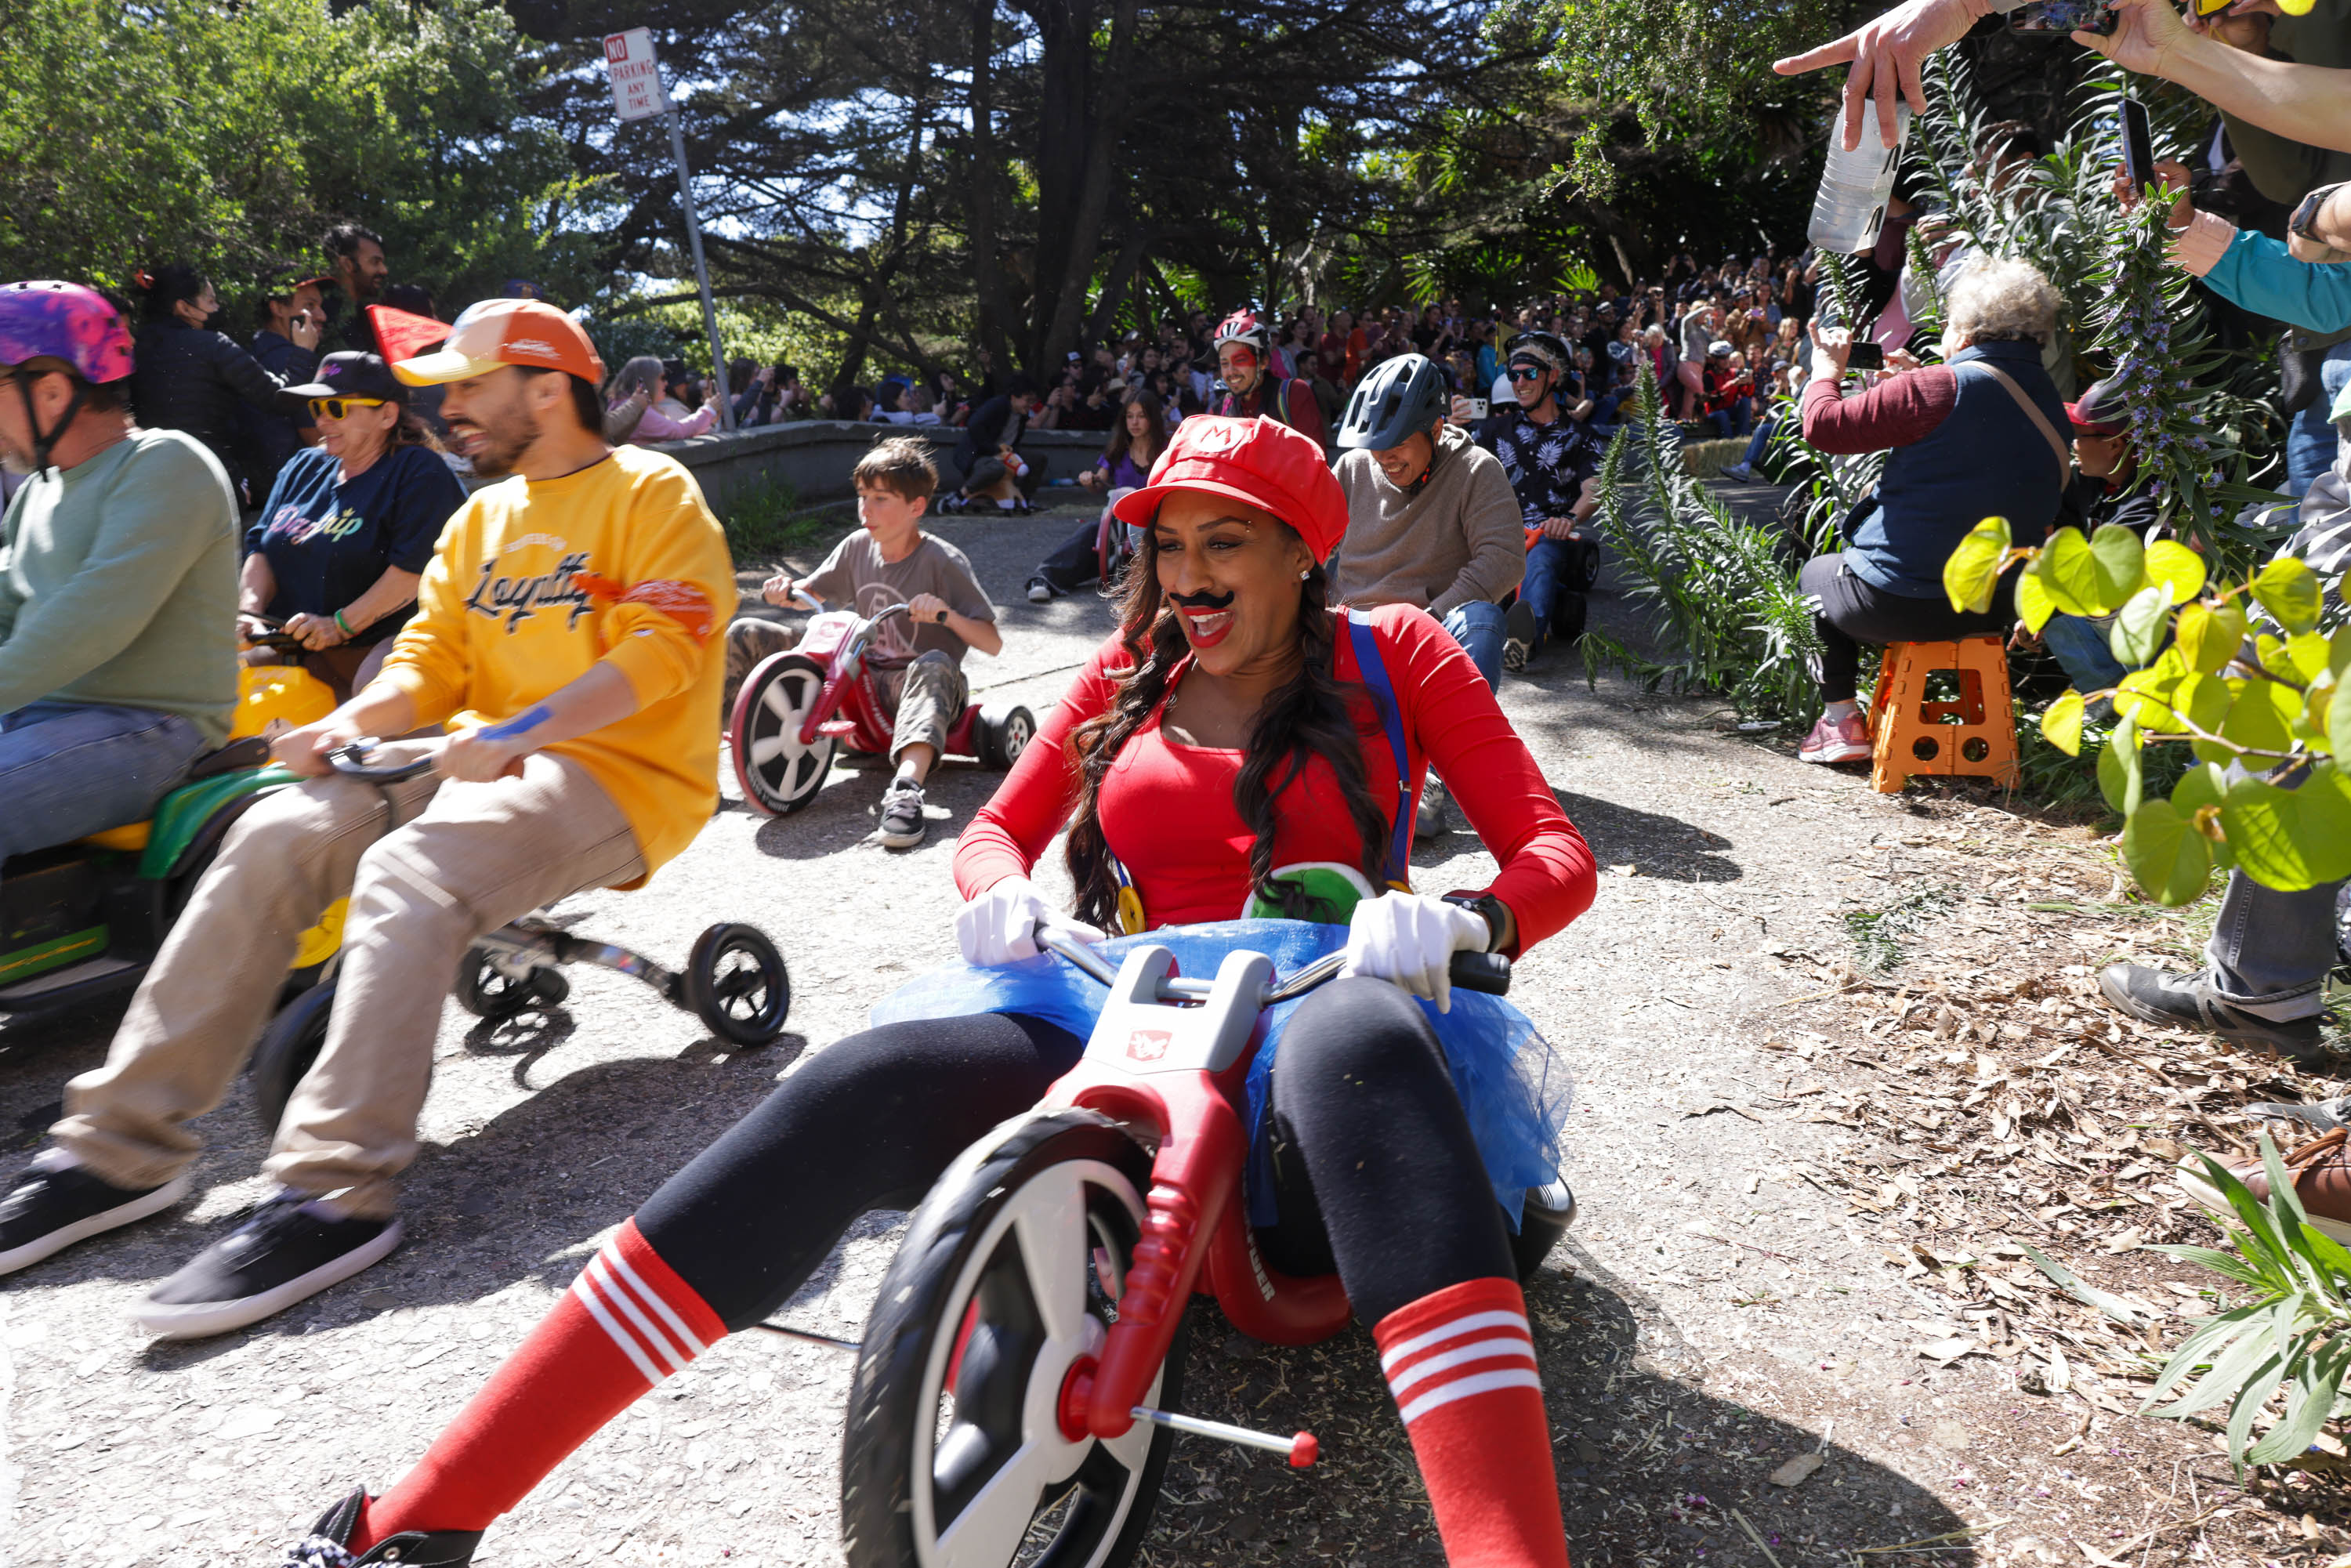 Adults in costumes ride big wheel bikes downhill, with a lively crowd watching.